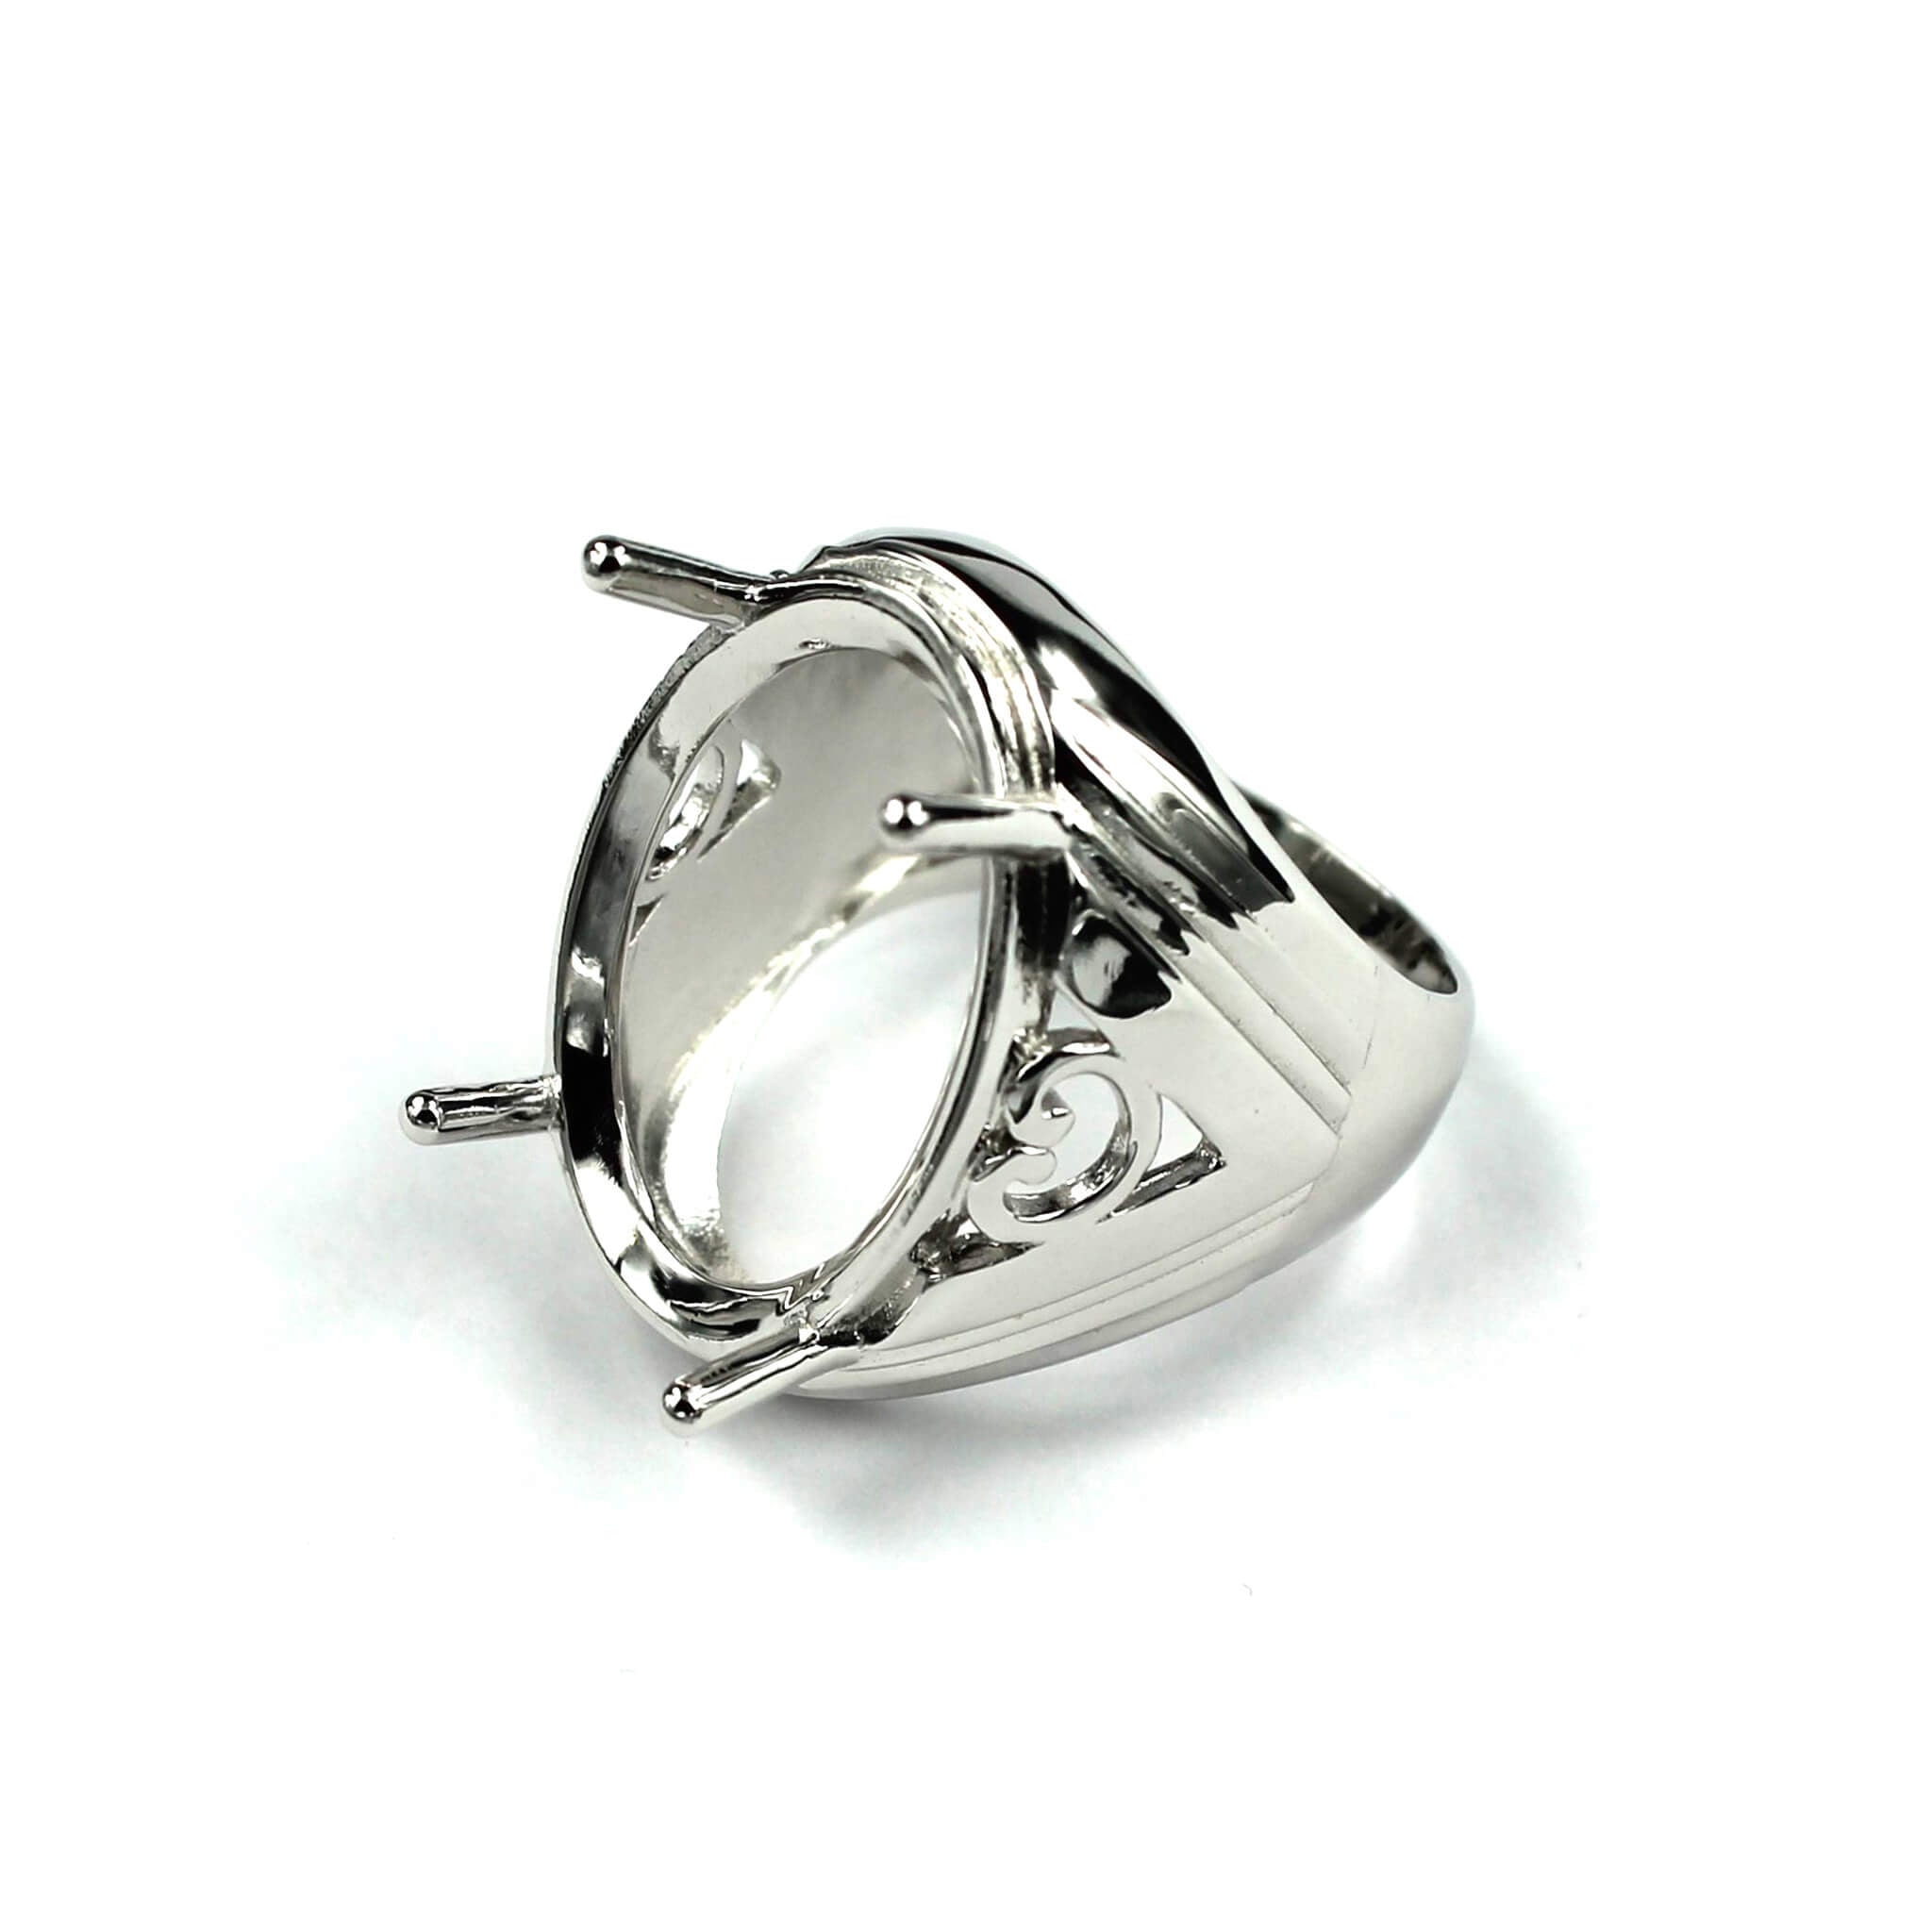 Hollow Patterned Ring with Oval Prongs Mounting in Sterling Silver 19x26mm